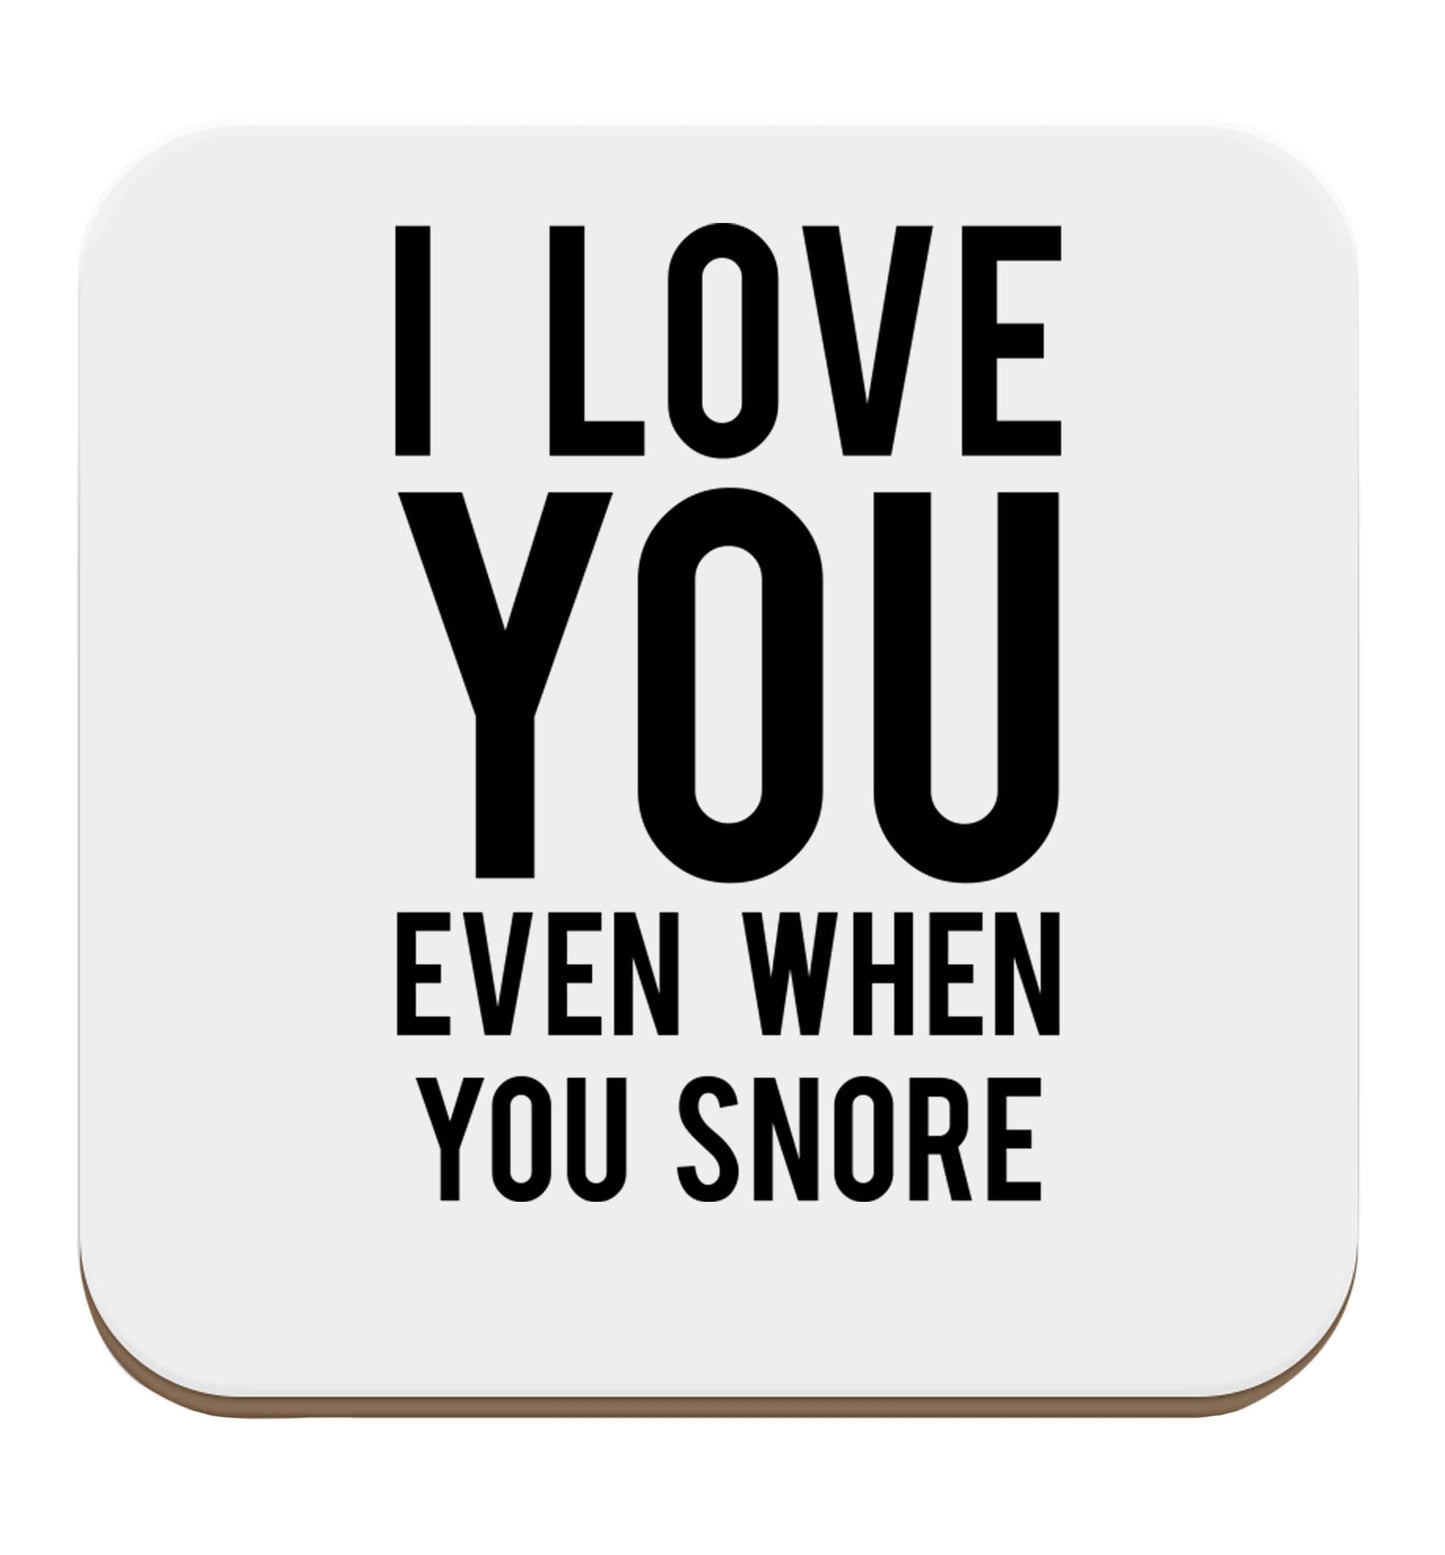 I love you even when you snore set of four coasters